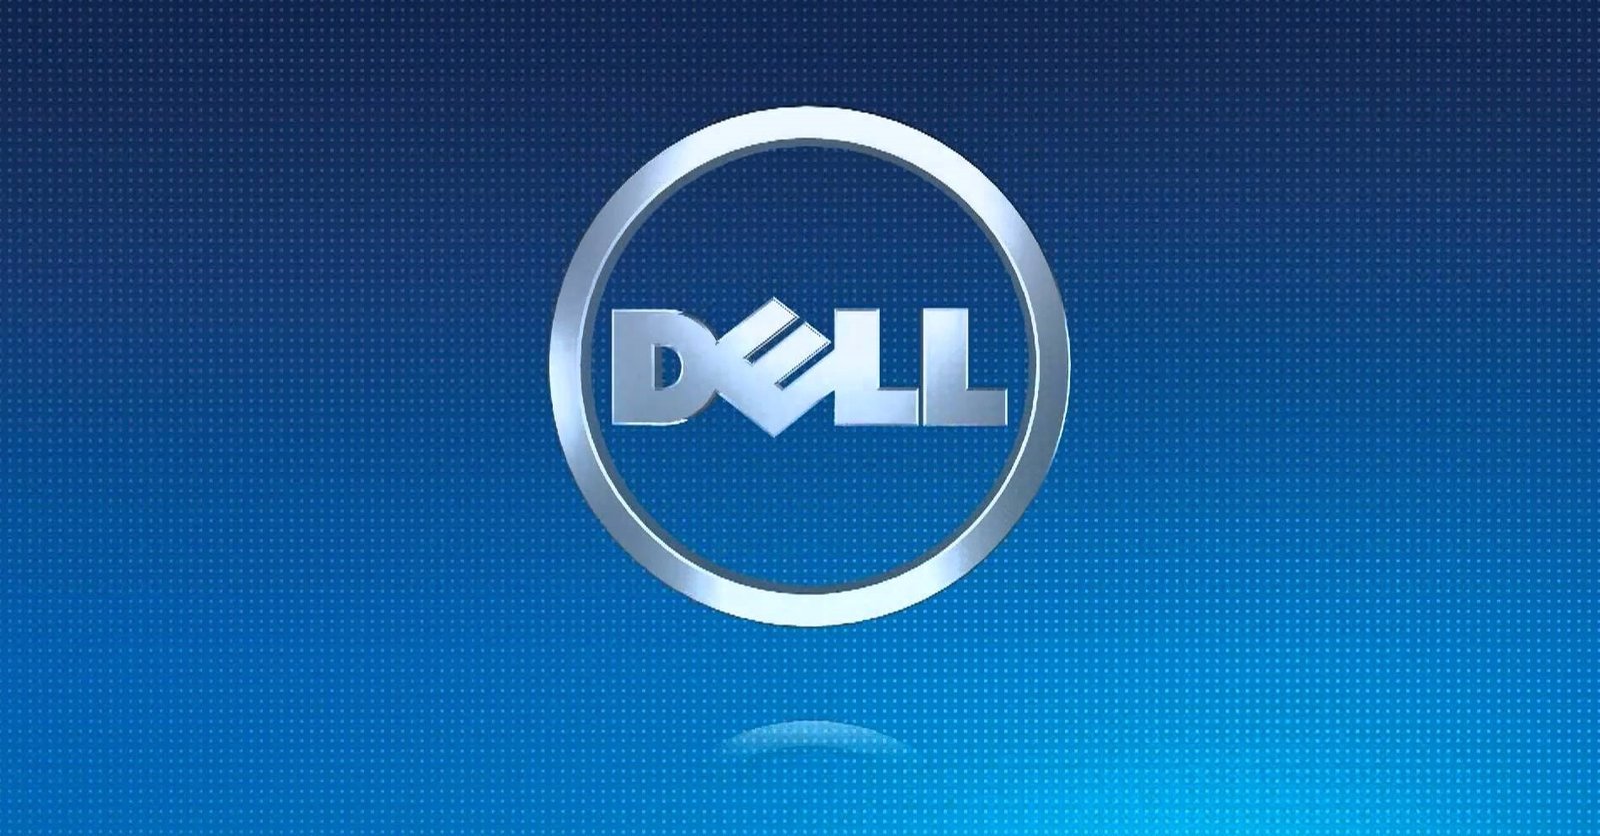 Marketing strategy of Dell